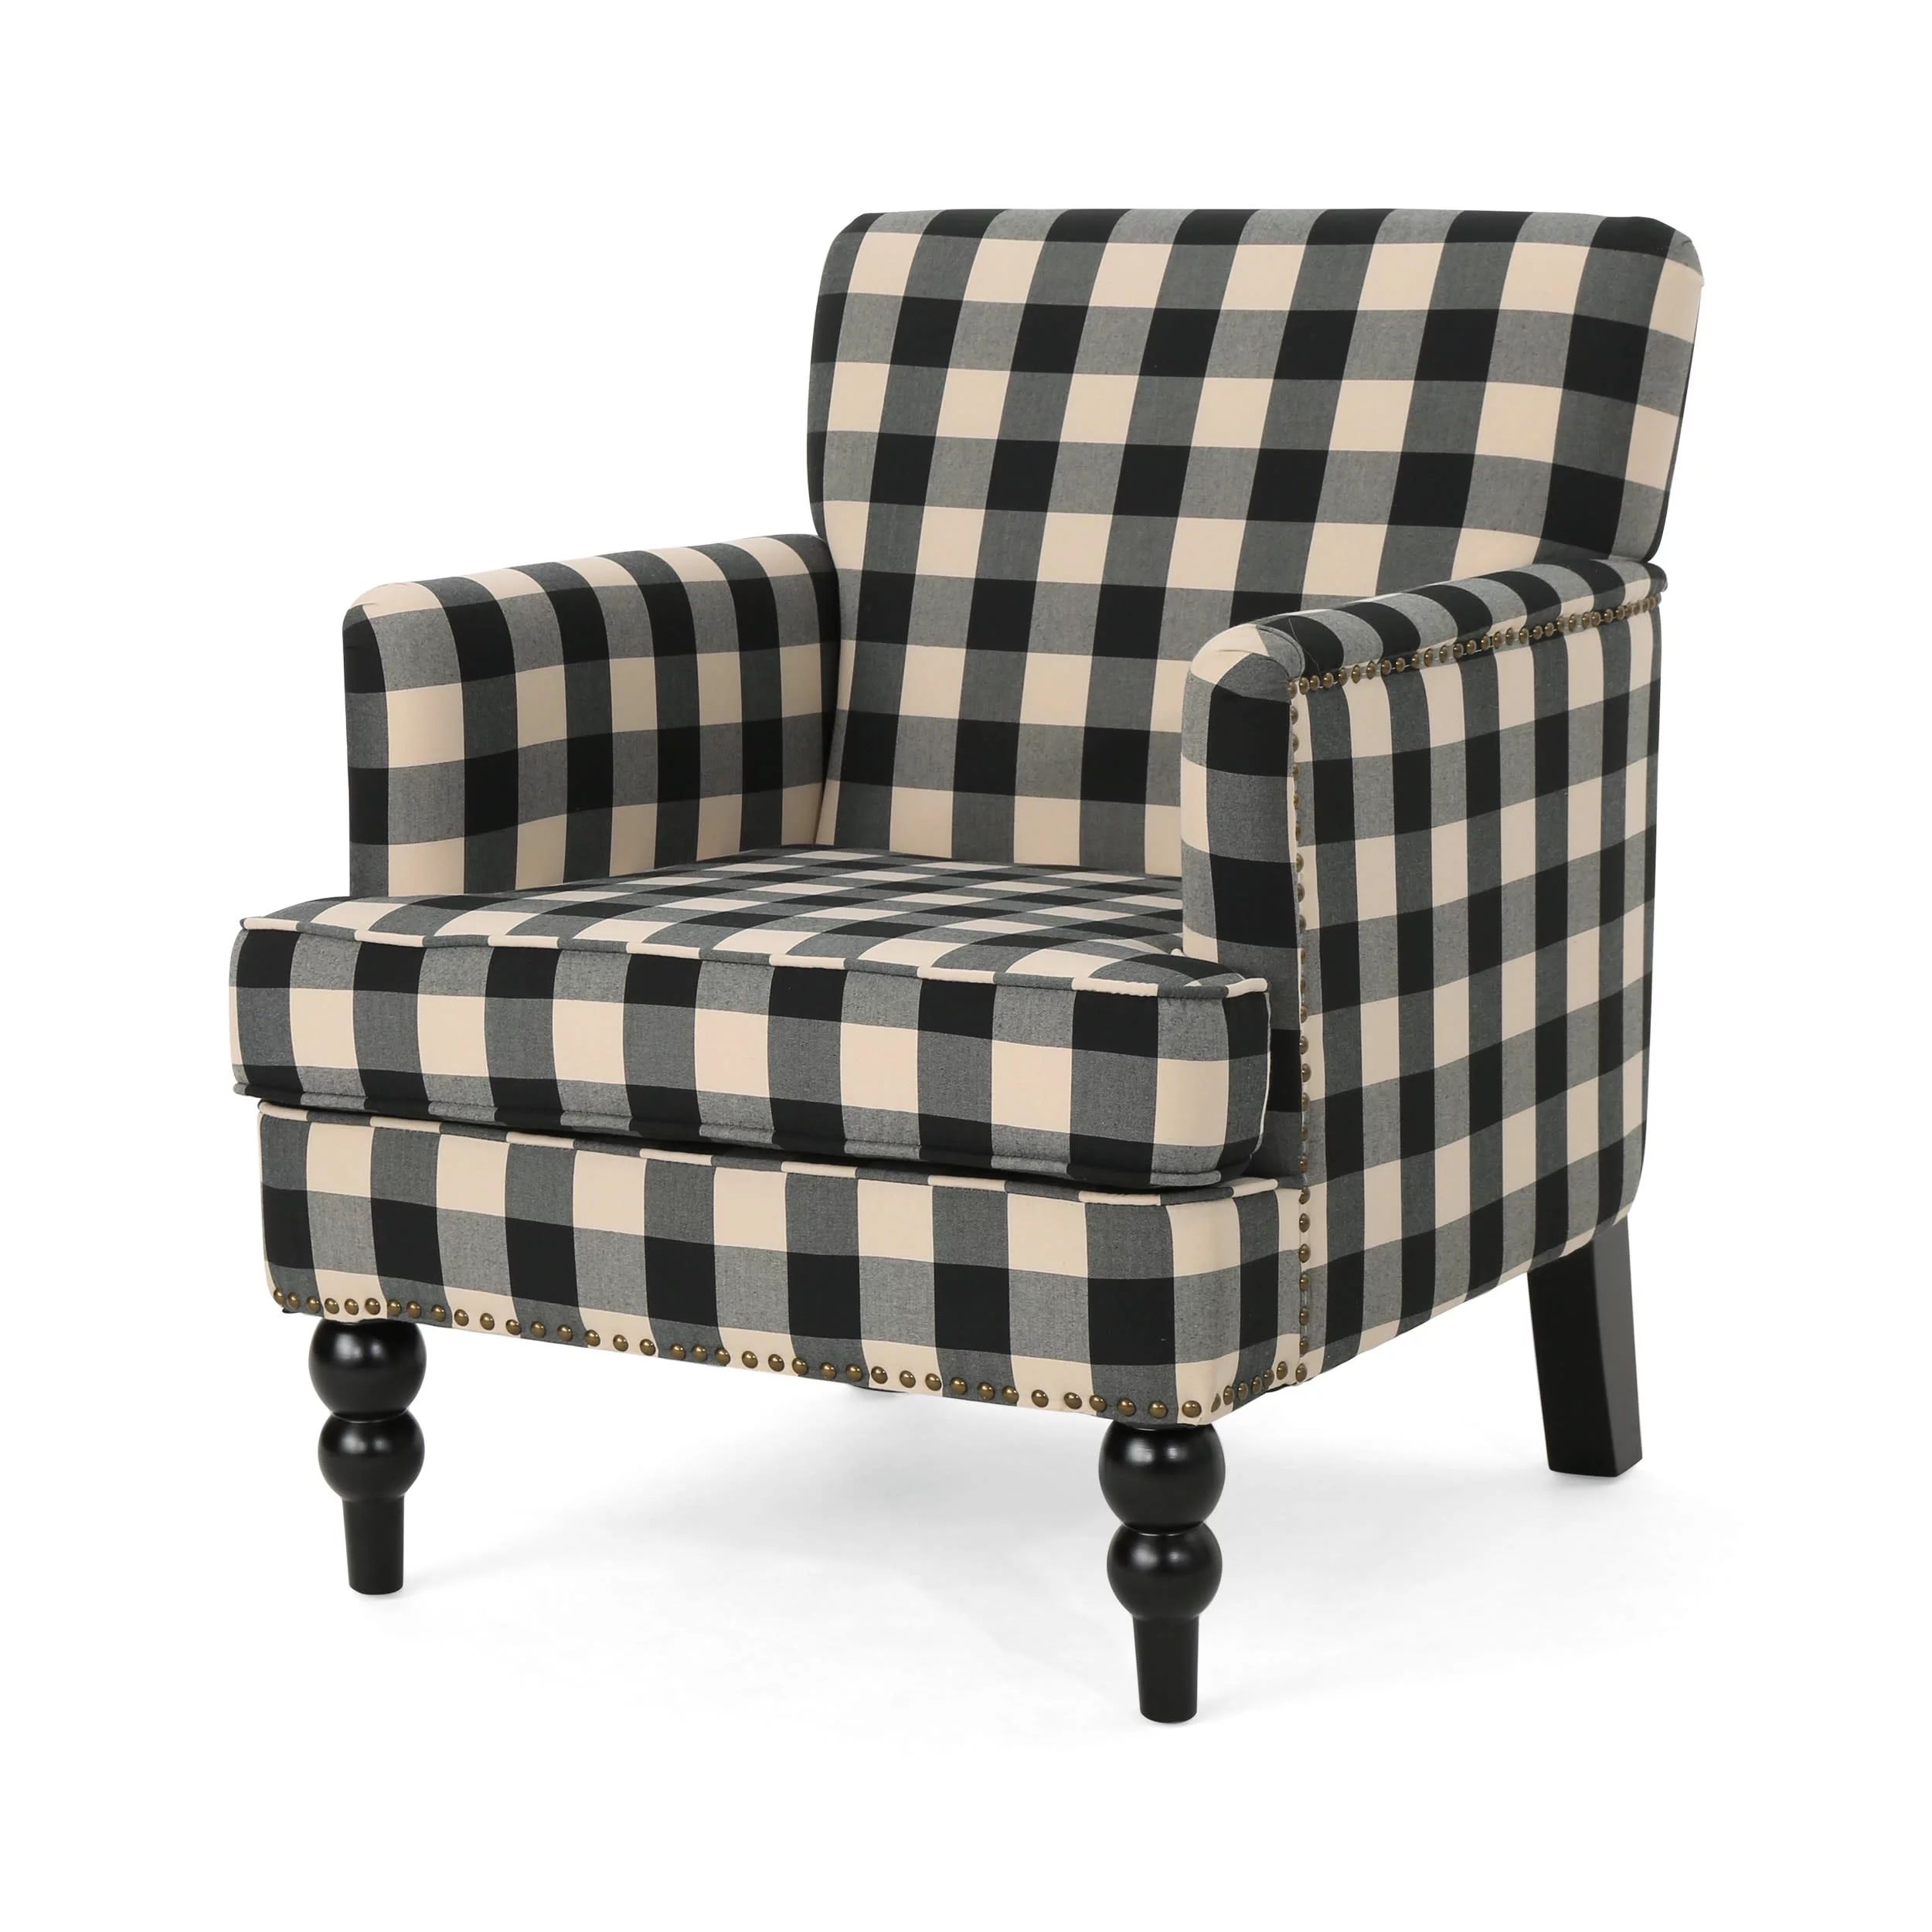 GDF Studio Eve Contemporary Fabric Upholstered Club Chair with Nailhead Trim, Black Checkerboard | Walmart (US)